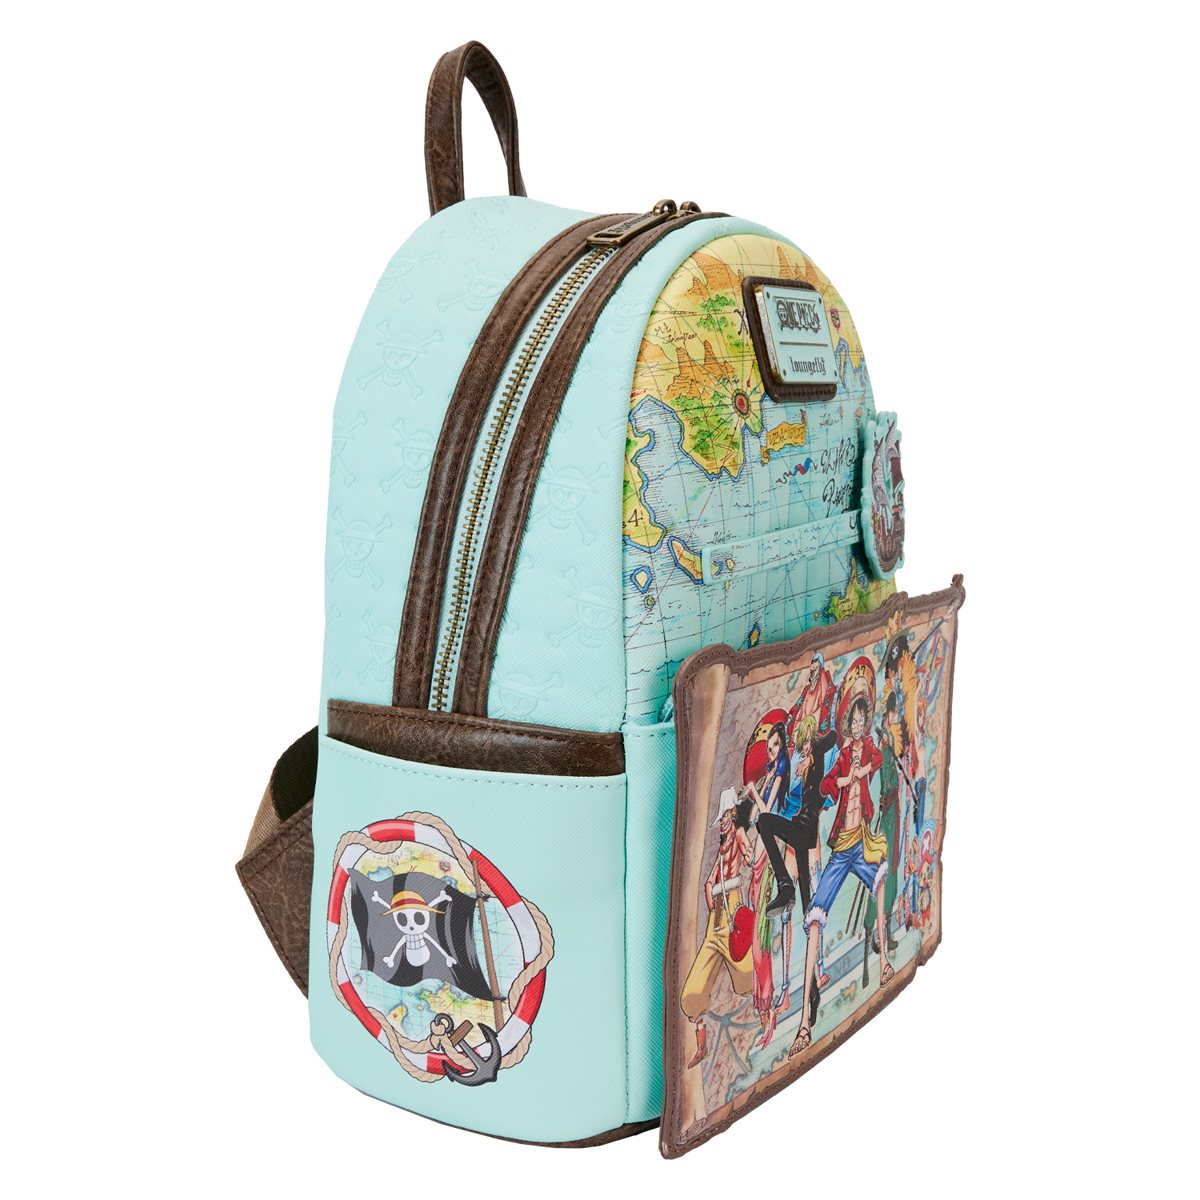 Loungefly: One Piece - Gang Map Mini Backpack || PRE-ORDER